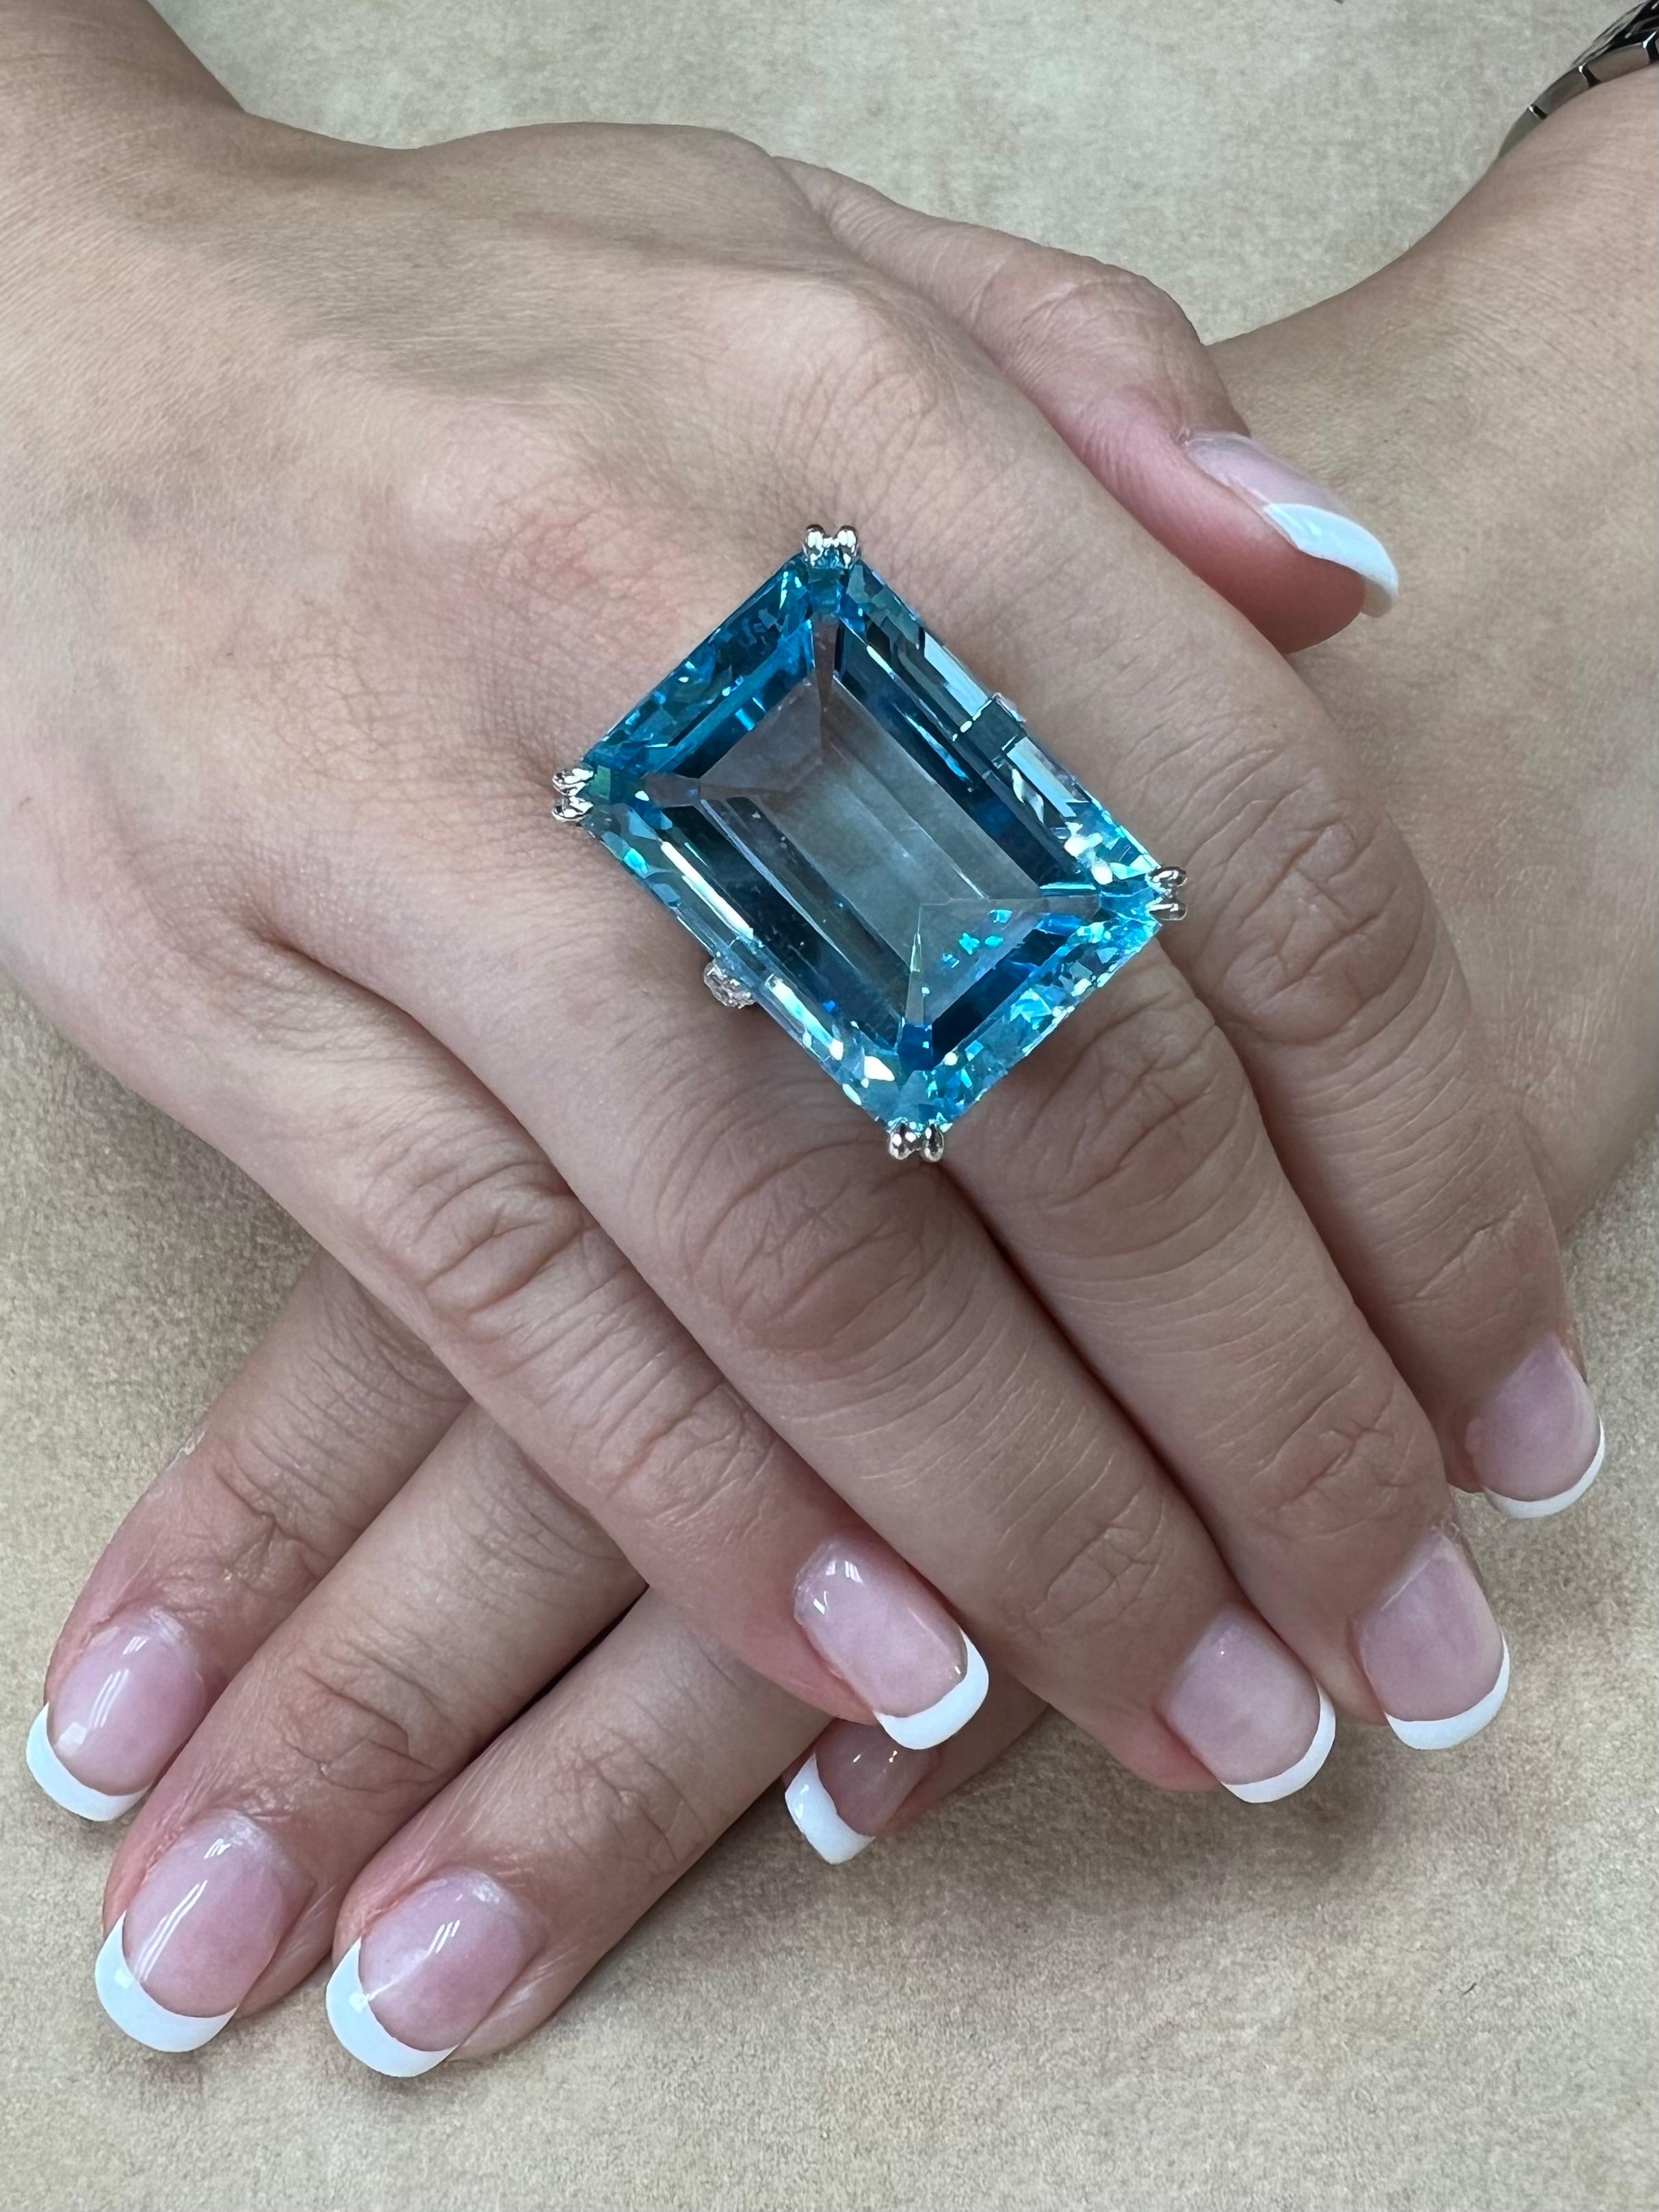 Please check out the HD video! Here is a super nice emerald step cut blue Topaz and diamond cocktail statement ring. It is set in 18k white gold. The 62.05 cts center Topaz is stunning in size, color and clarity. The color is an eye catching Swiss